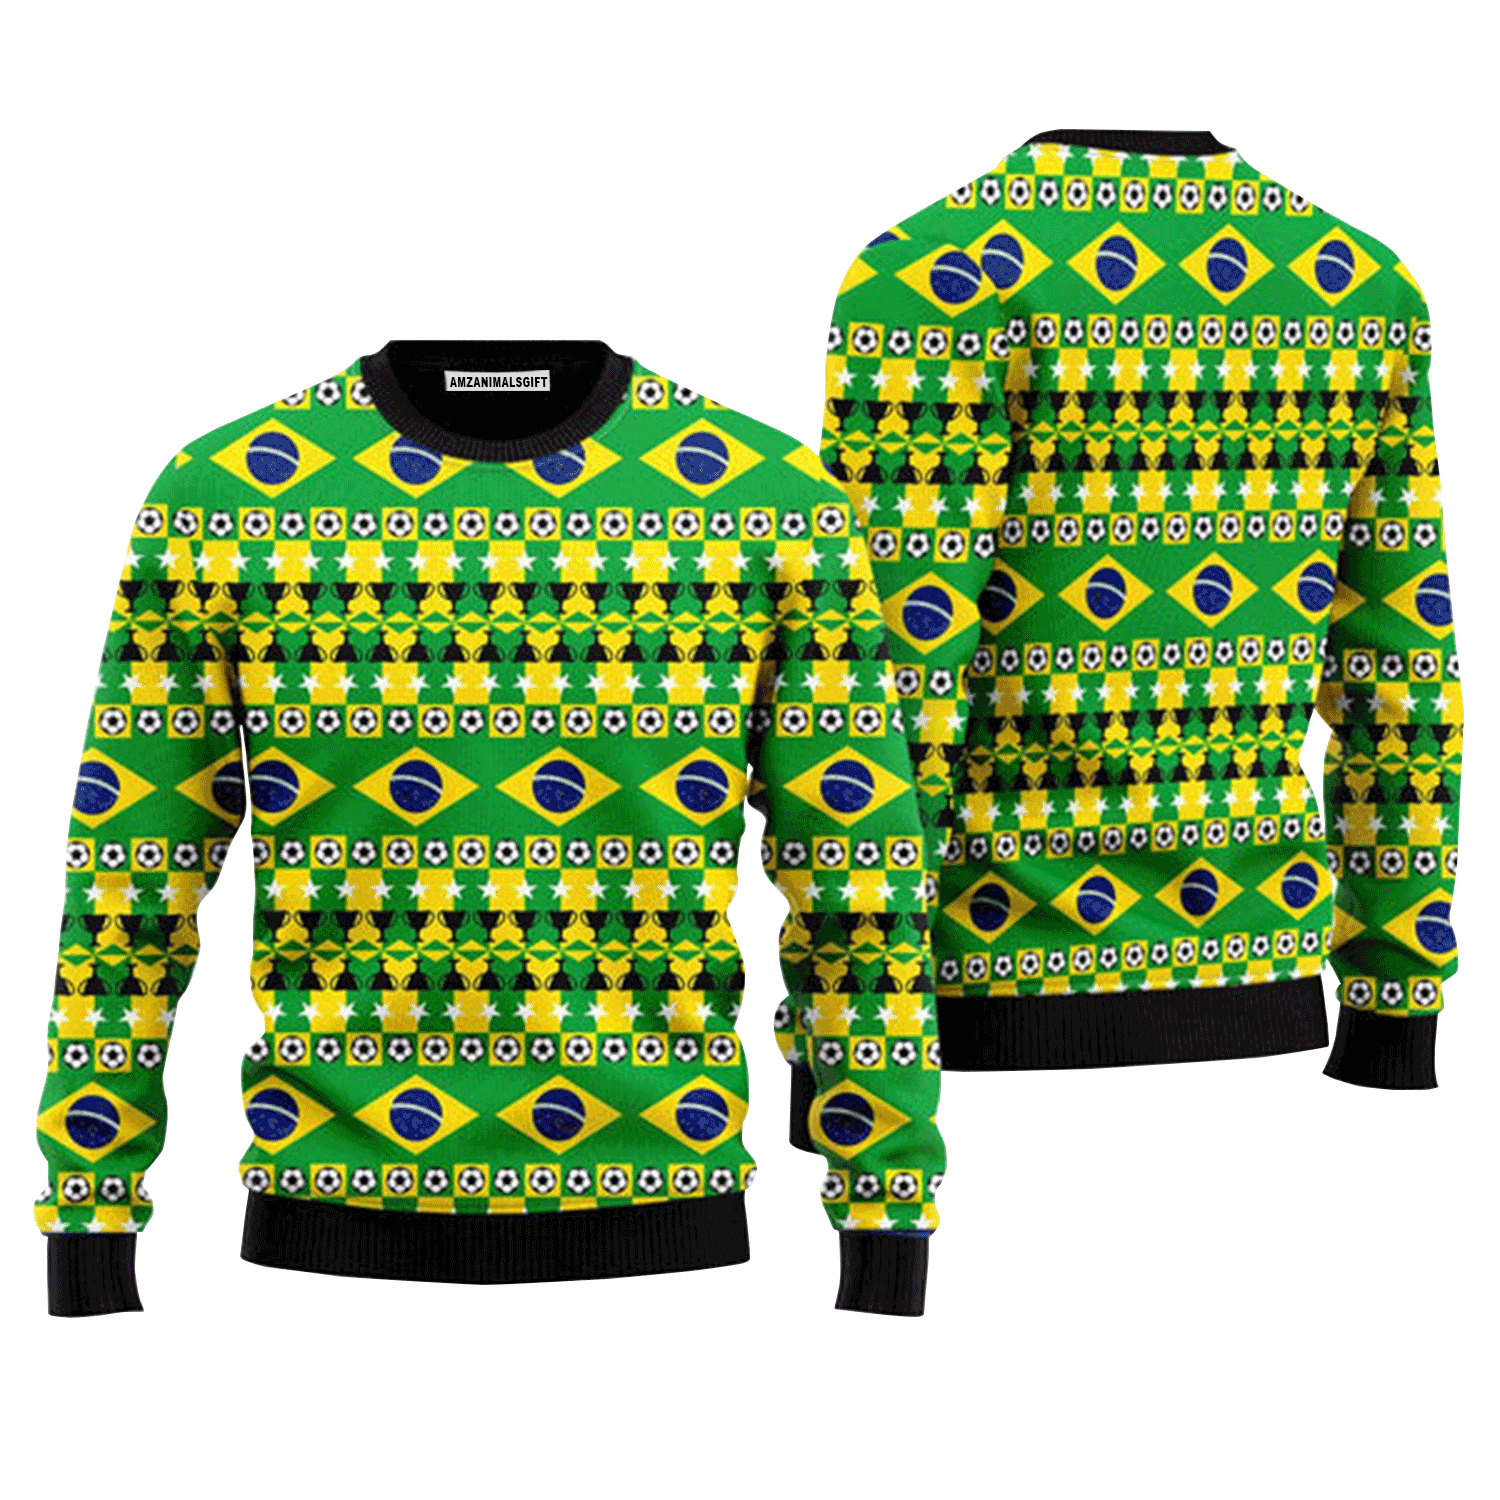 Brazil We Will Be A Champion Football Cup Sweater, Ugly Christmas Sweater For Men & Women, Perfect Outfit For Christmas New Year Autumn Winter